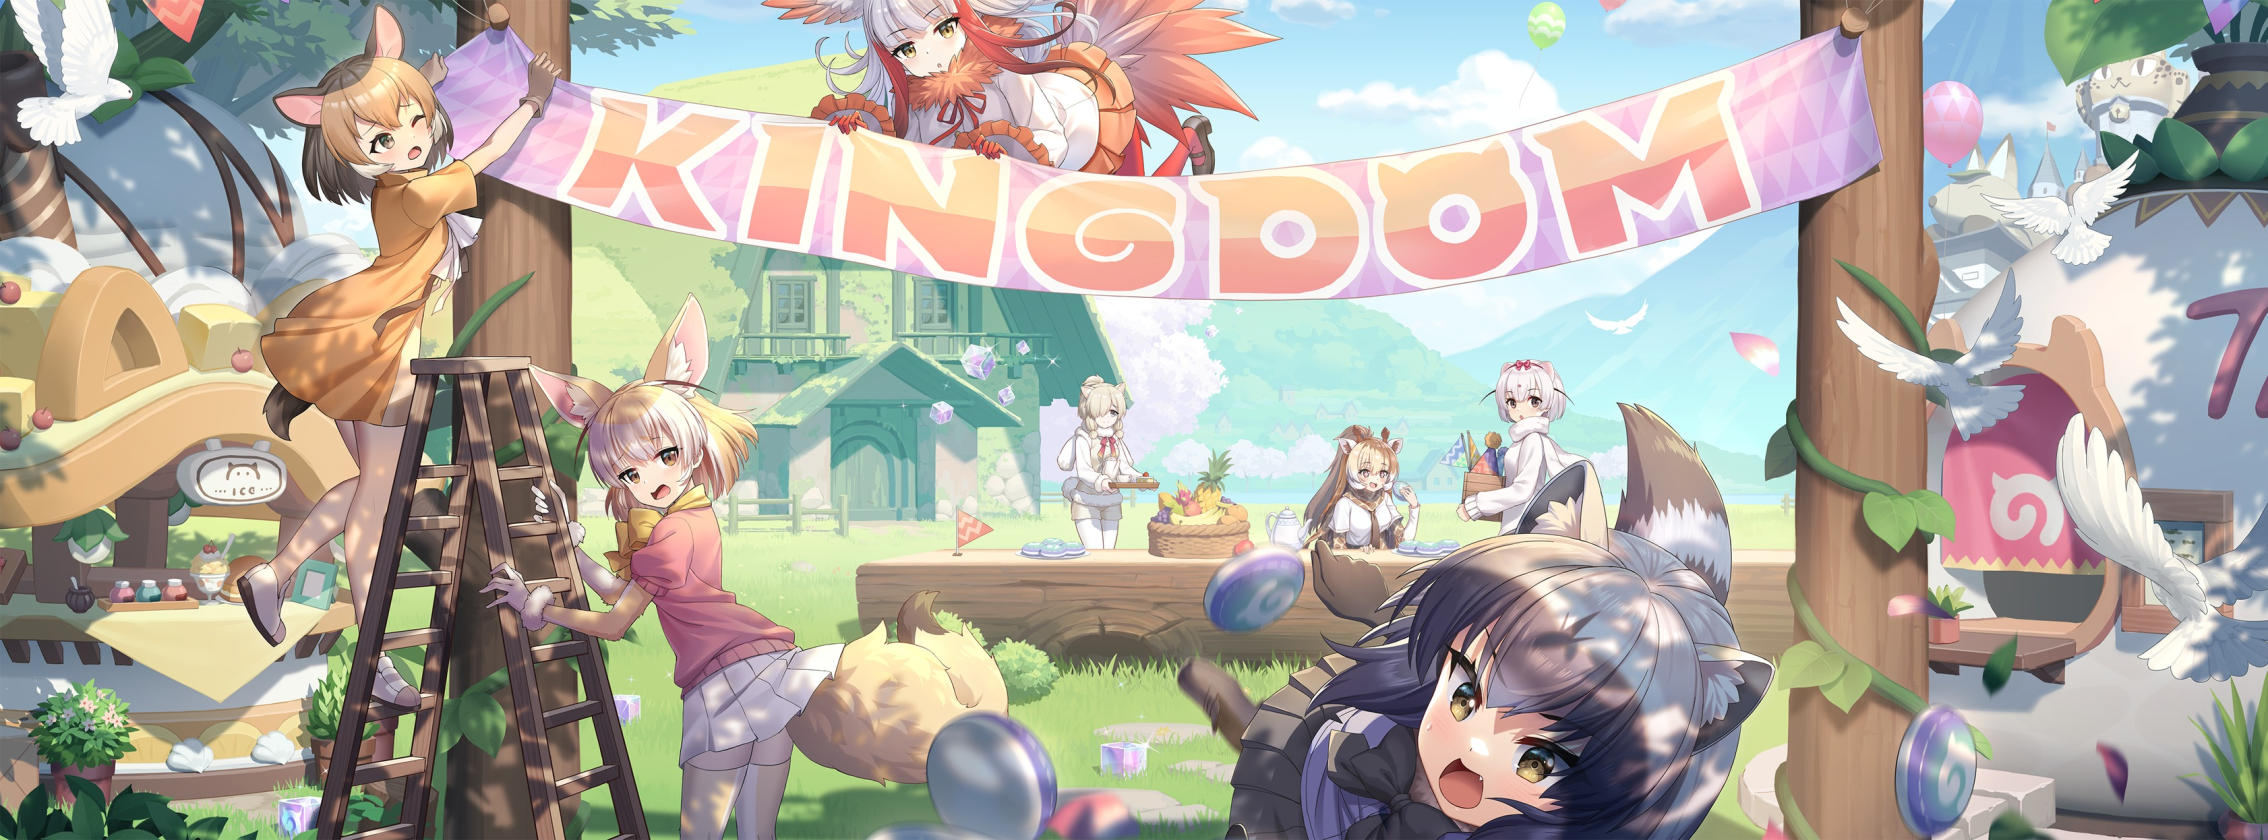 Banner art for the official Facebook of Kemono Friends Kingdom (Taiwan server).